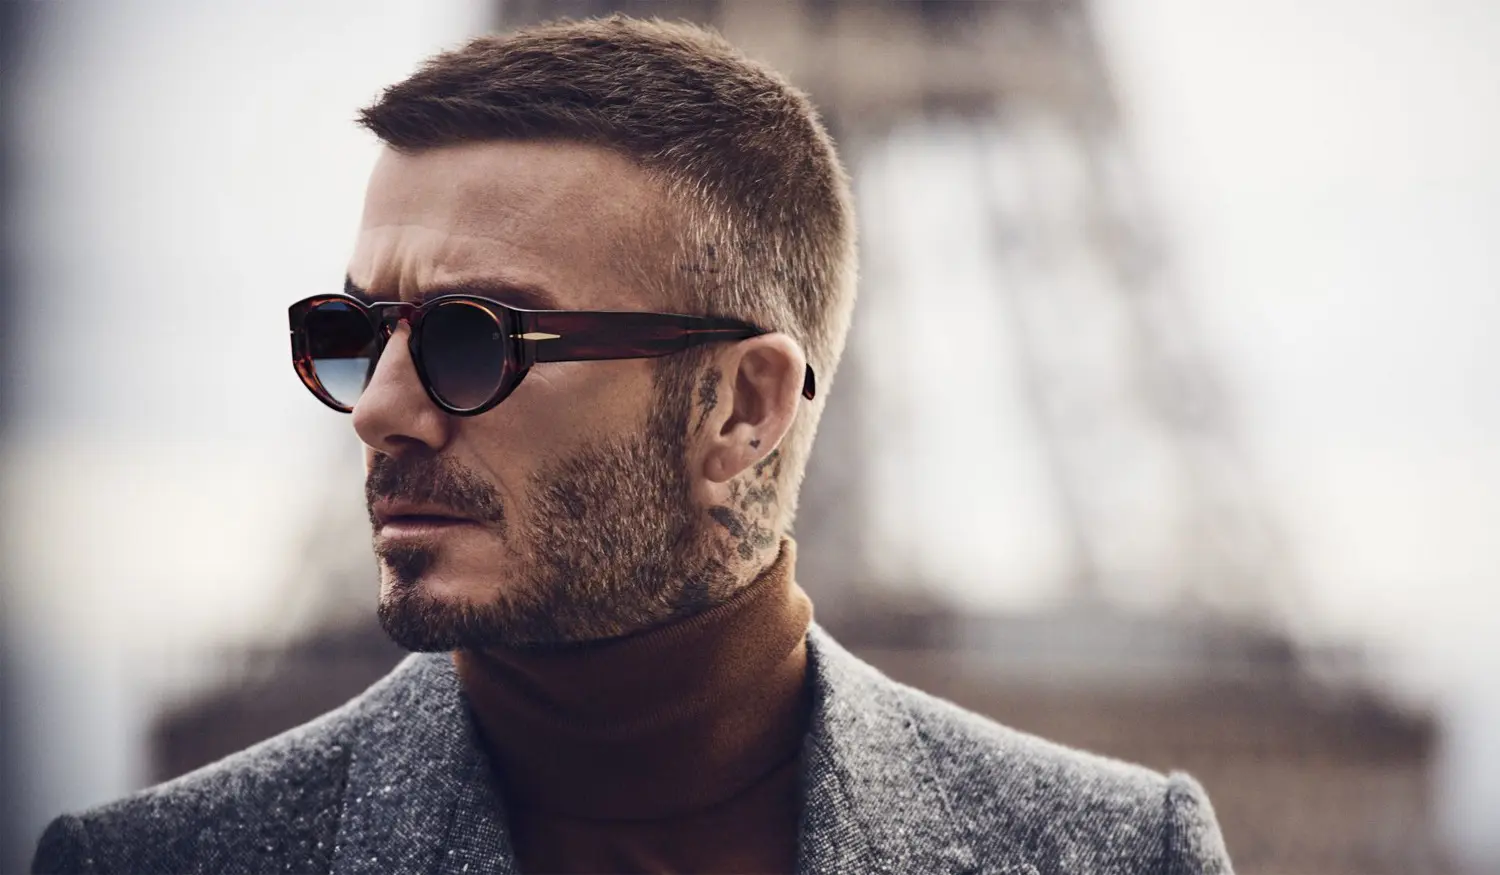 Short Haircuts For Men: Styling Options To Suit Everyone